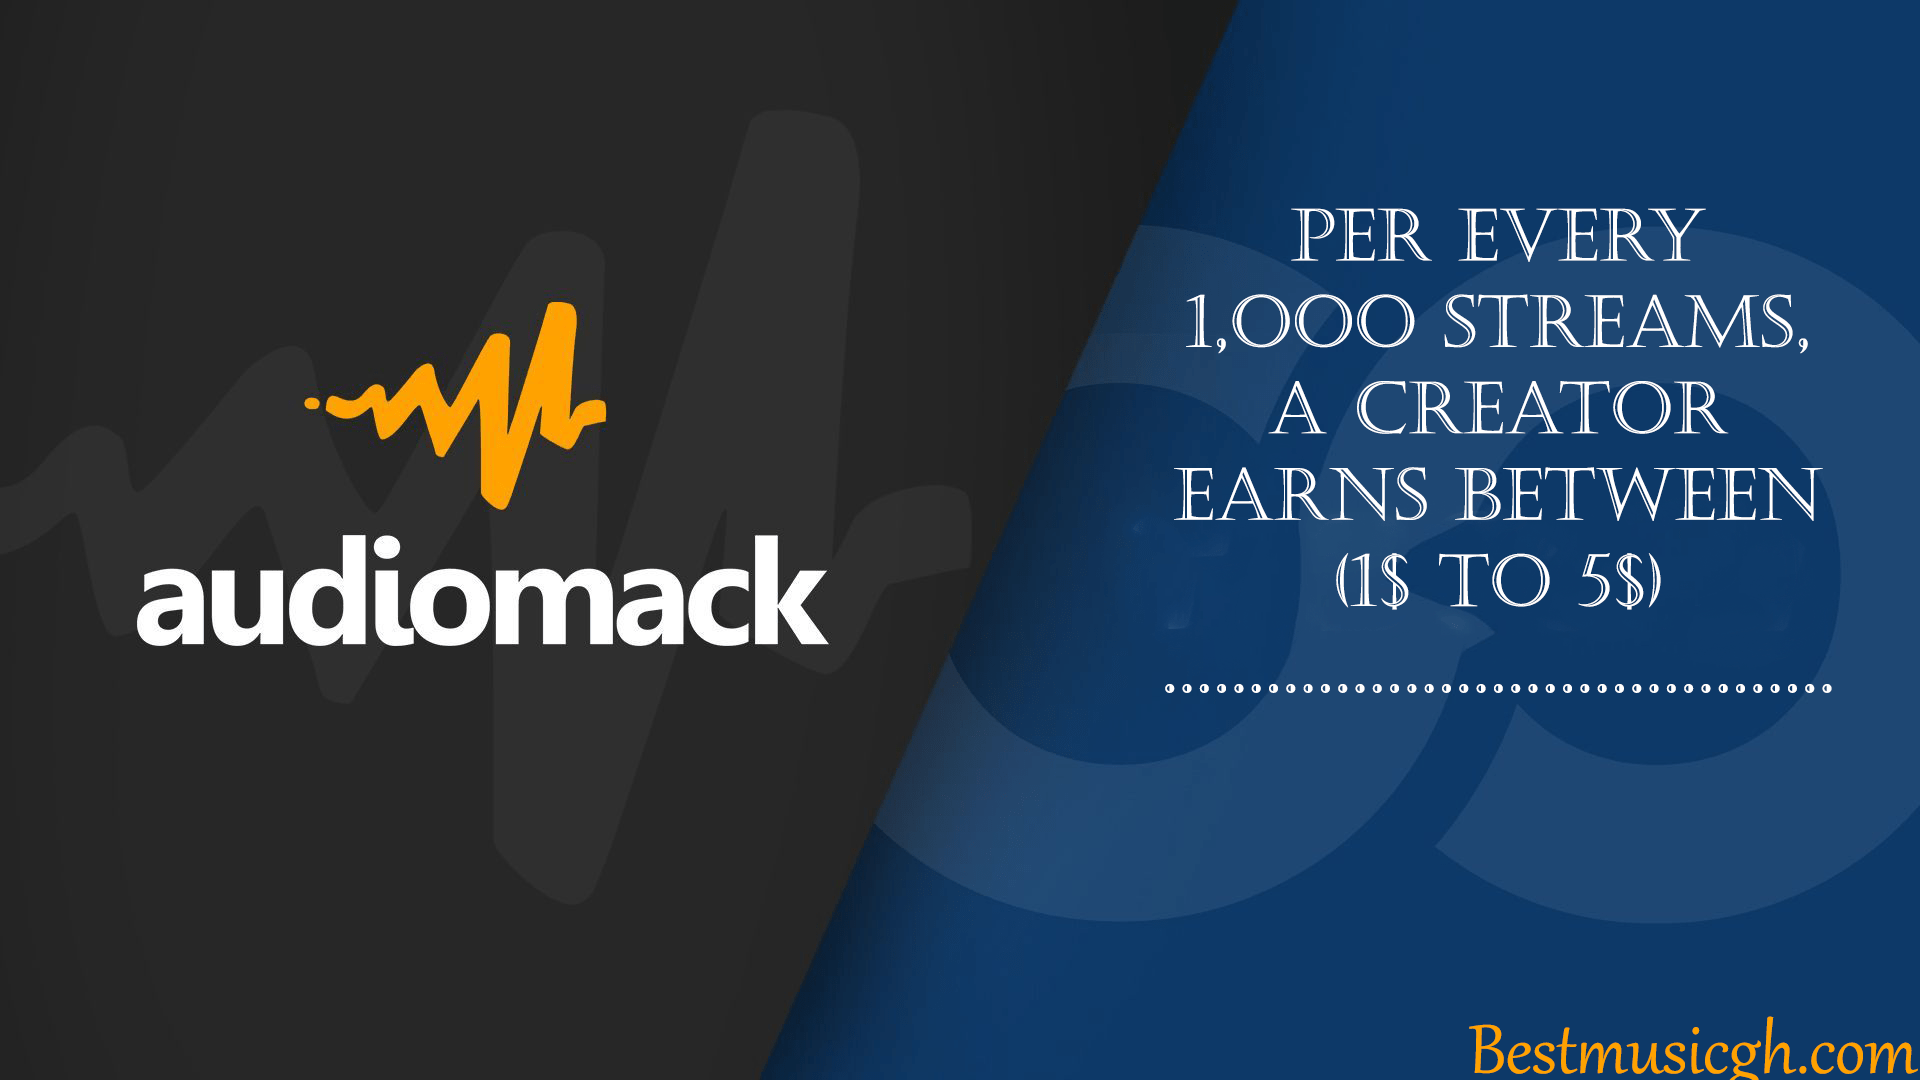 How Much Does Audiomack Pay Per 1,000 Streams?